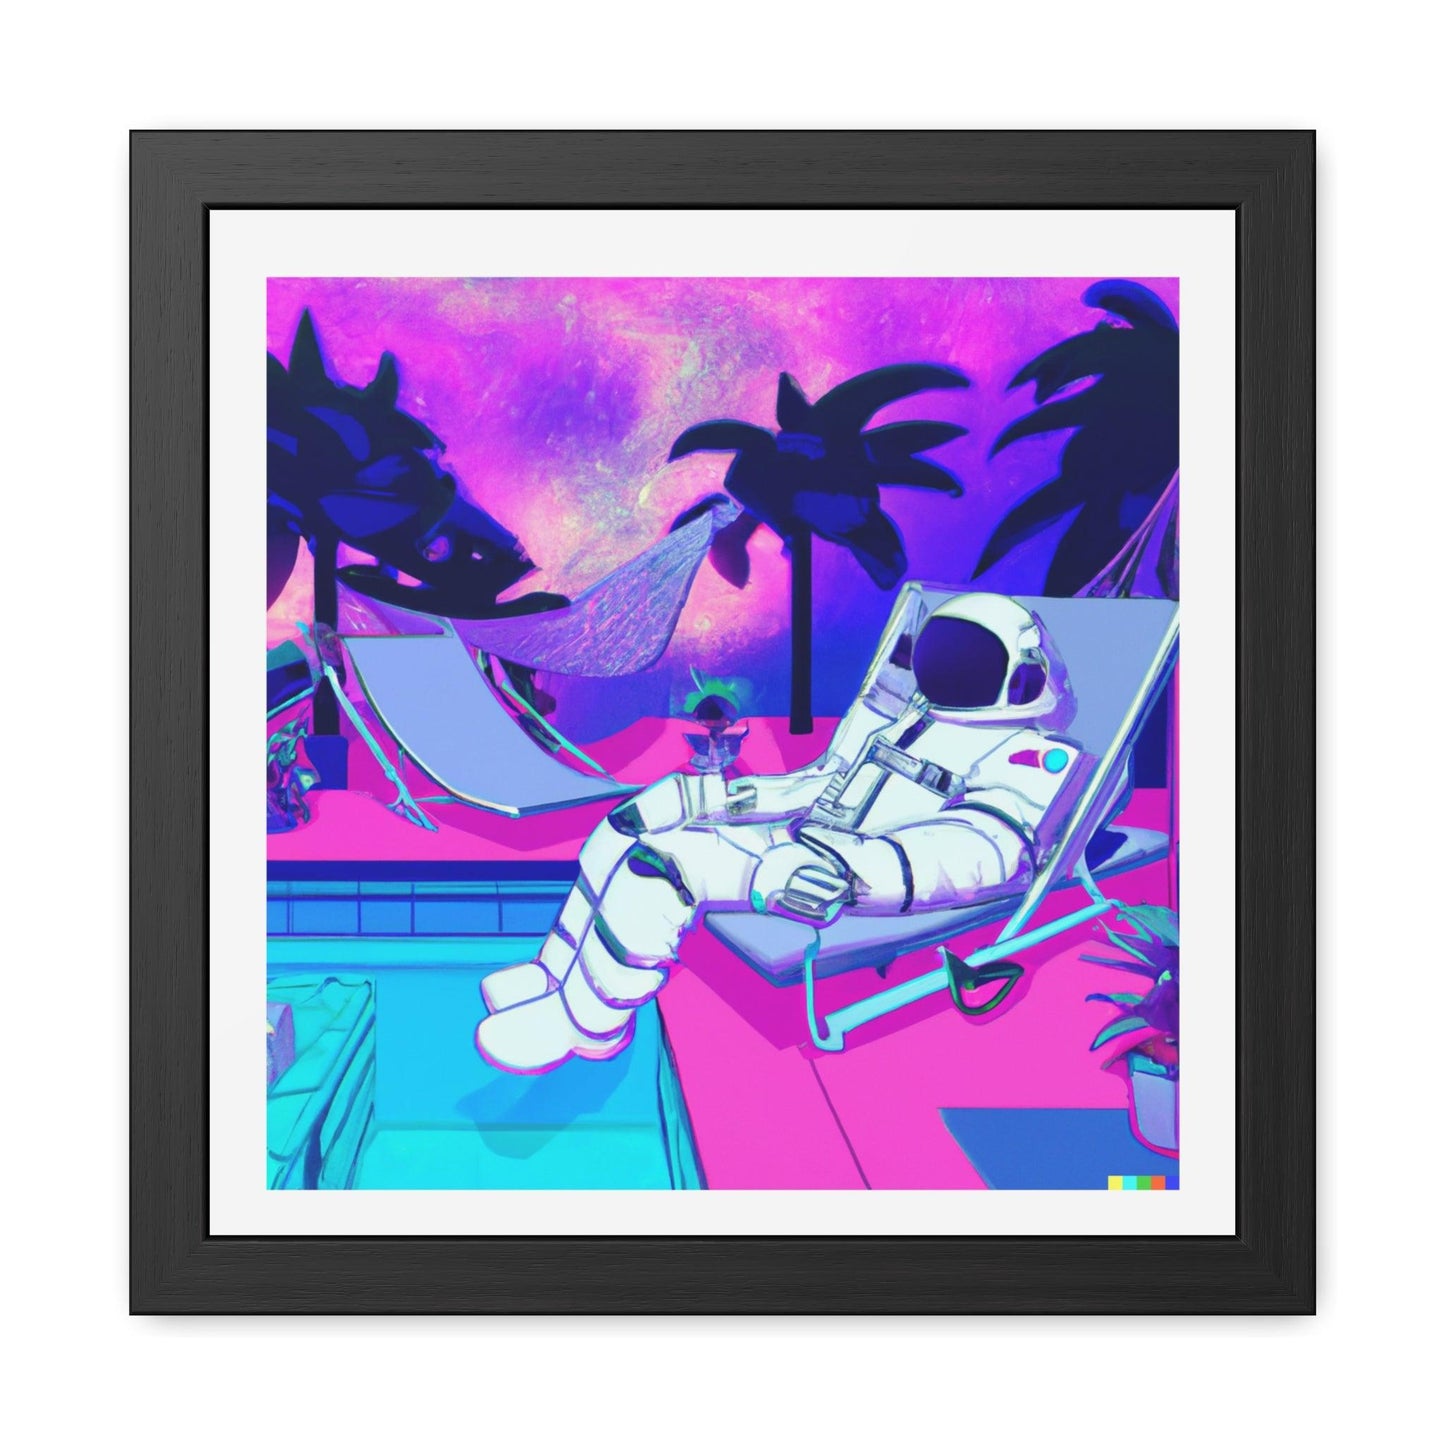 Astronaut Lounging by Pool Framed Poster Wall Art - MAIA HOMES